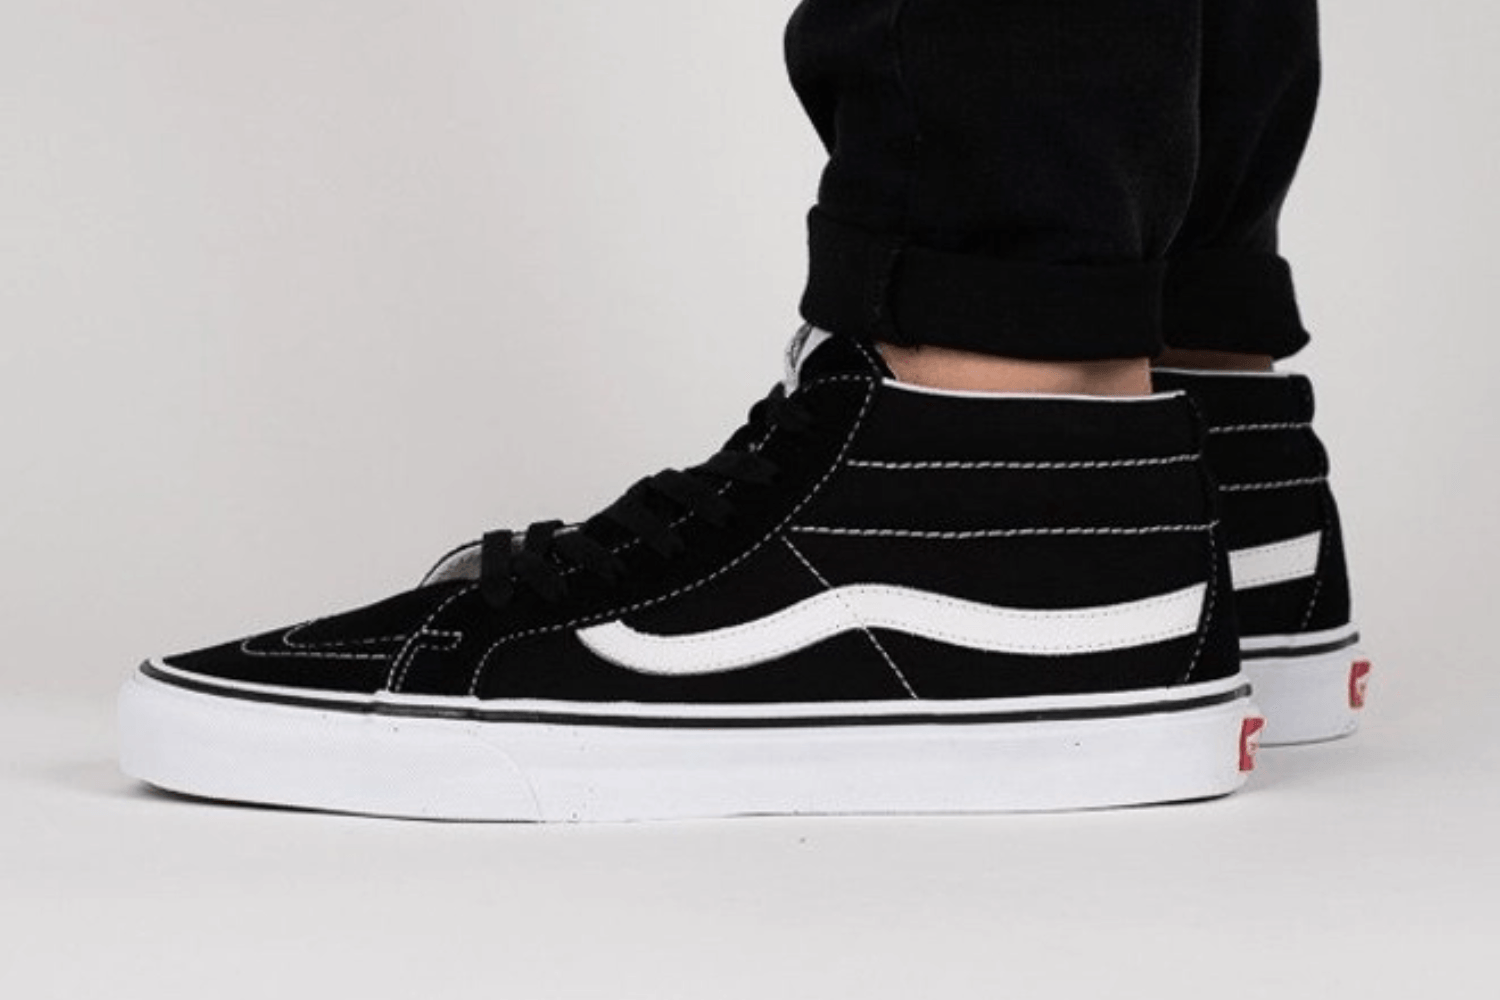 Know your Size: Der Vans Sizing Guide